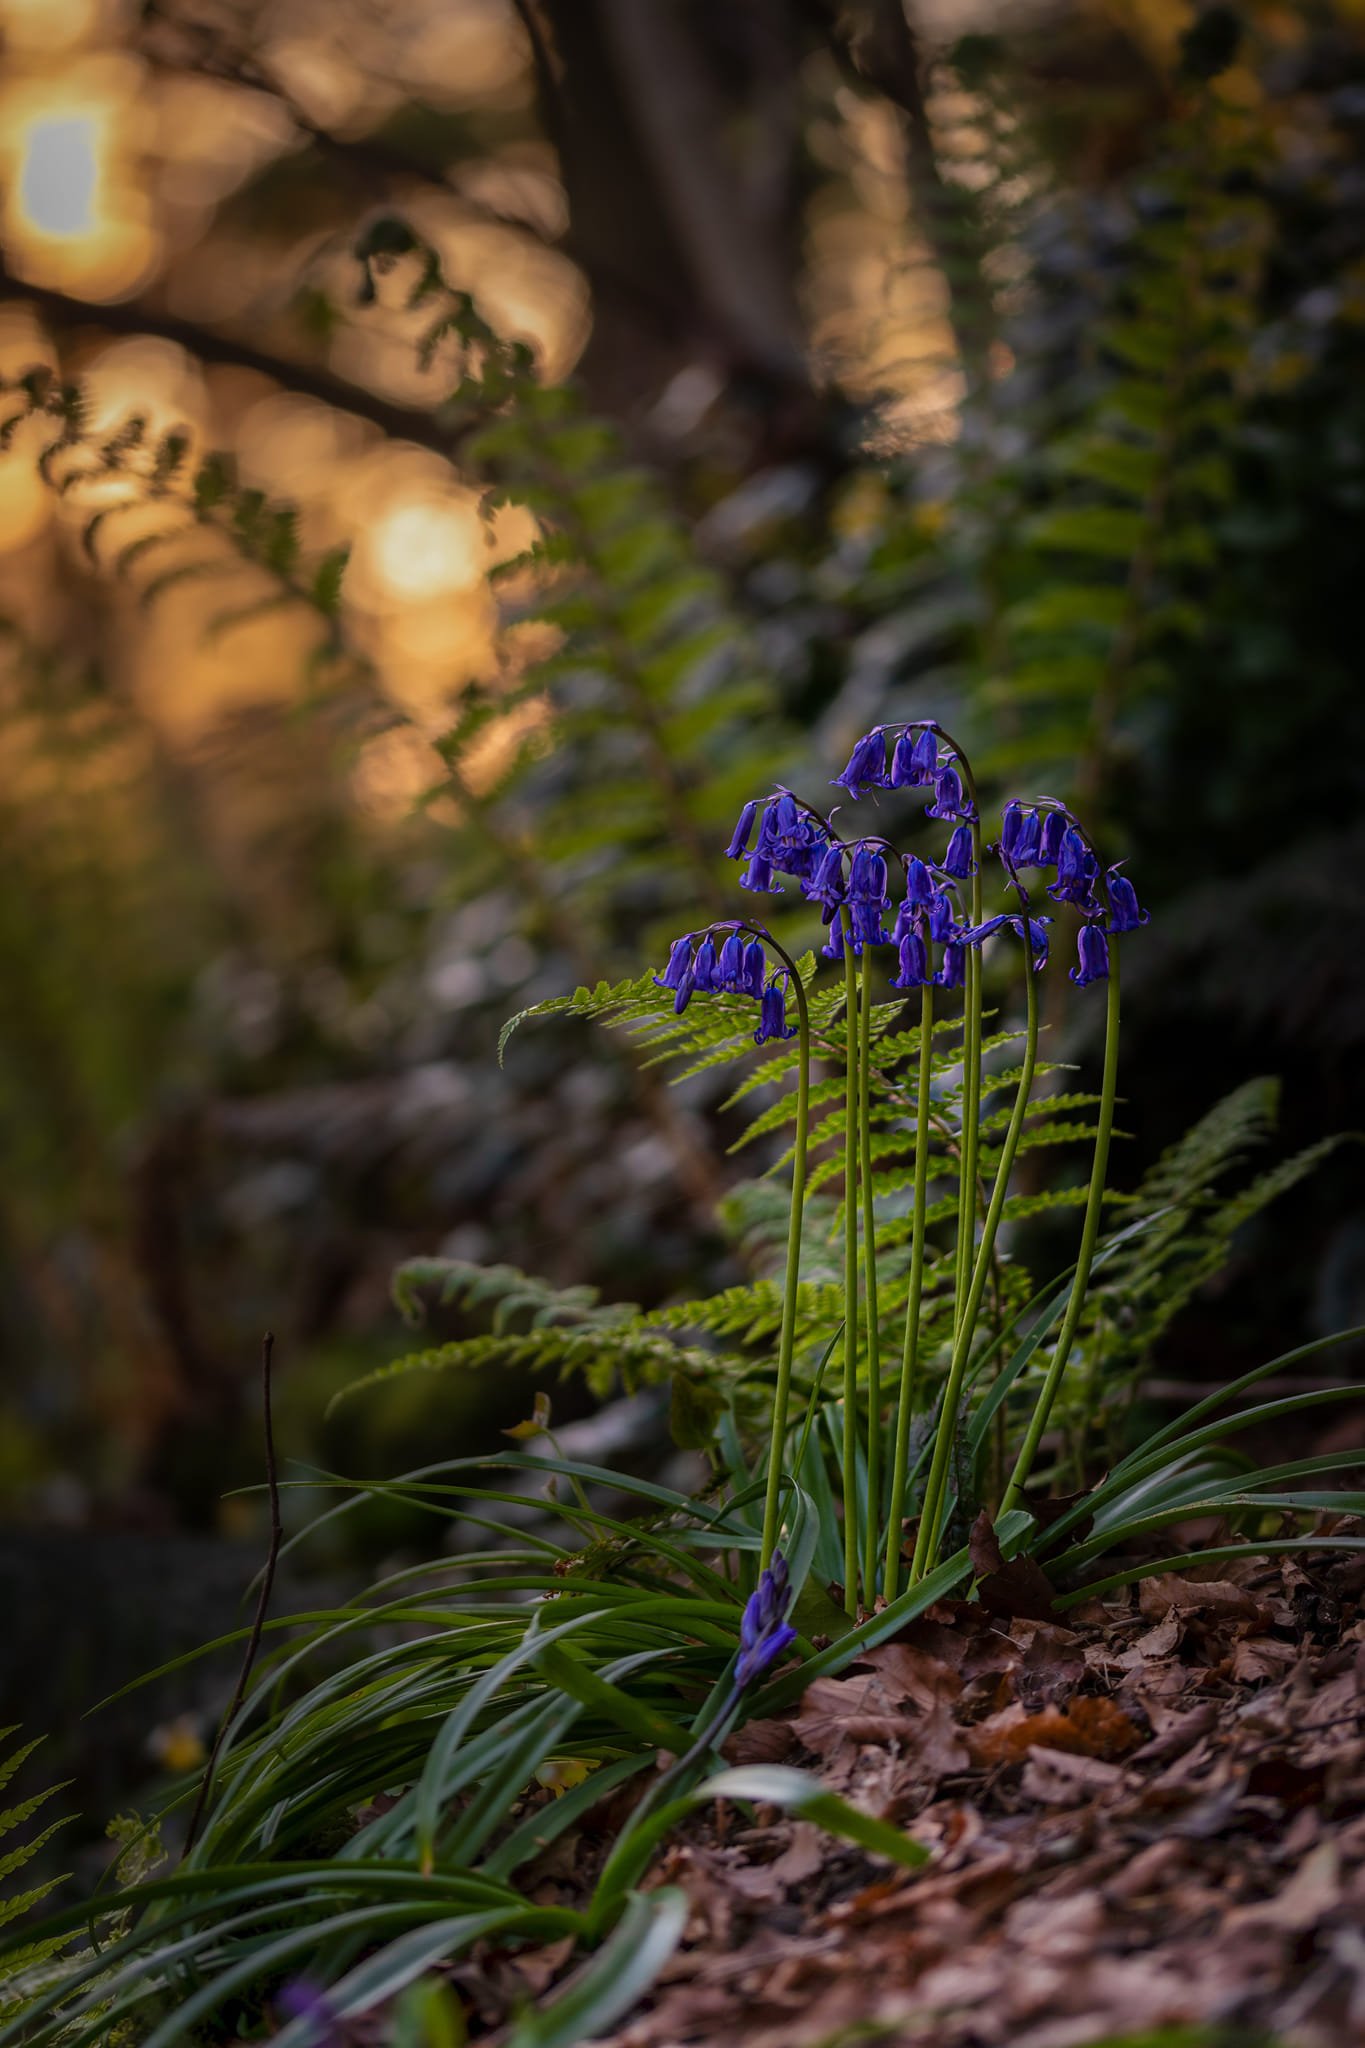 We love seeing the shots that our members capture as the seasons change! 🌸 
Member Ian McMichael @photos_by_ian85 has captured these beautiful bluebells in this springtime shot 🤩

Looking to capture some beautiful bluebells this spring?  Check out 